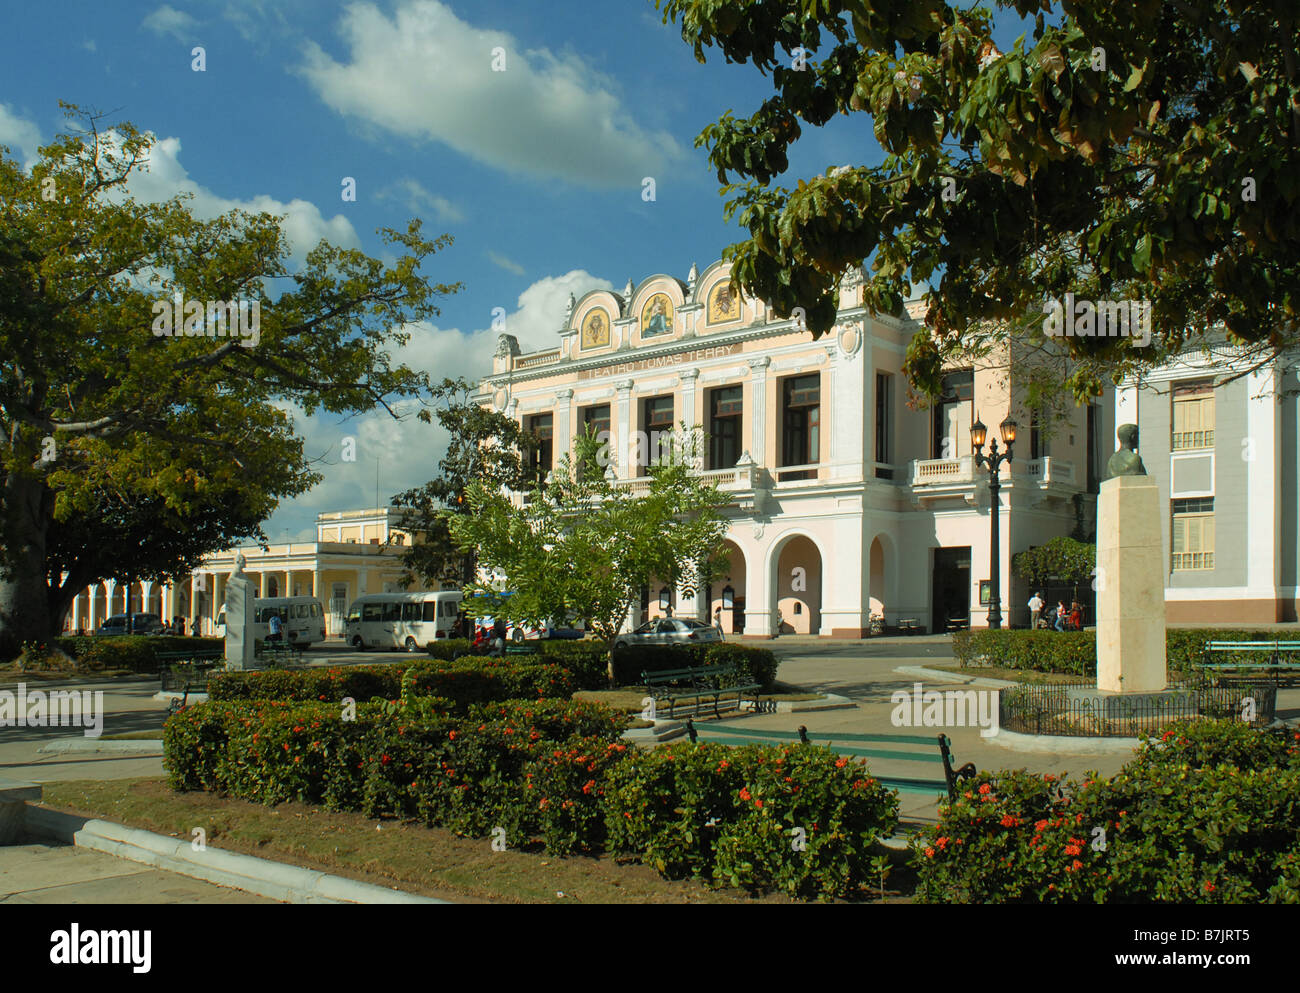 View across the Jose Marti park in Cienfuegos towards the Tomas Terry Theatre Stock Photo